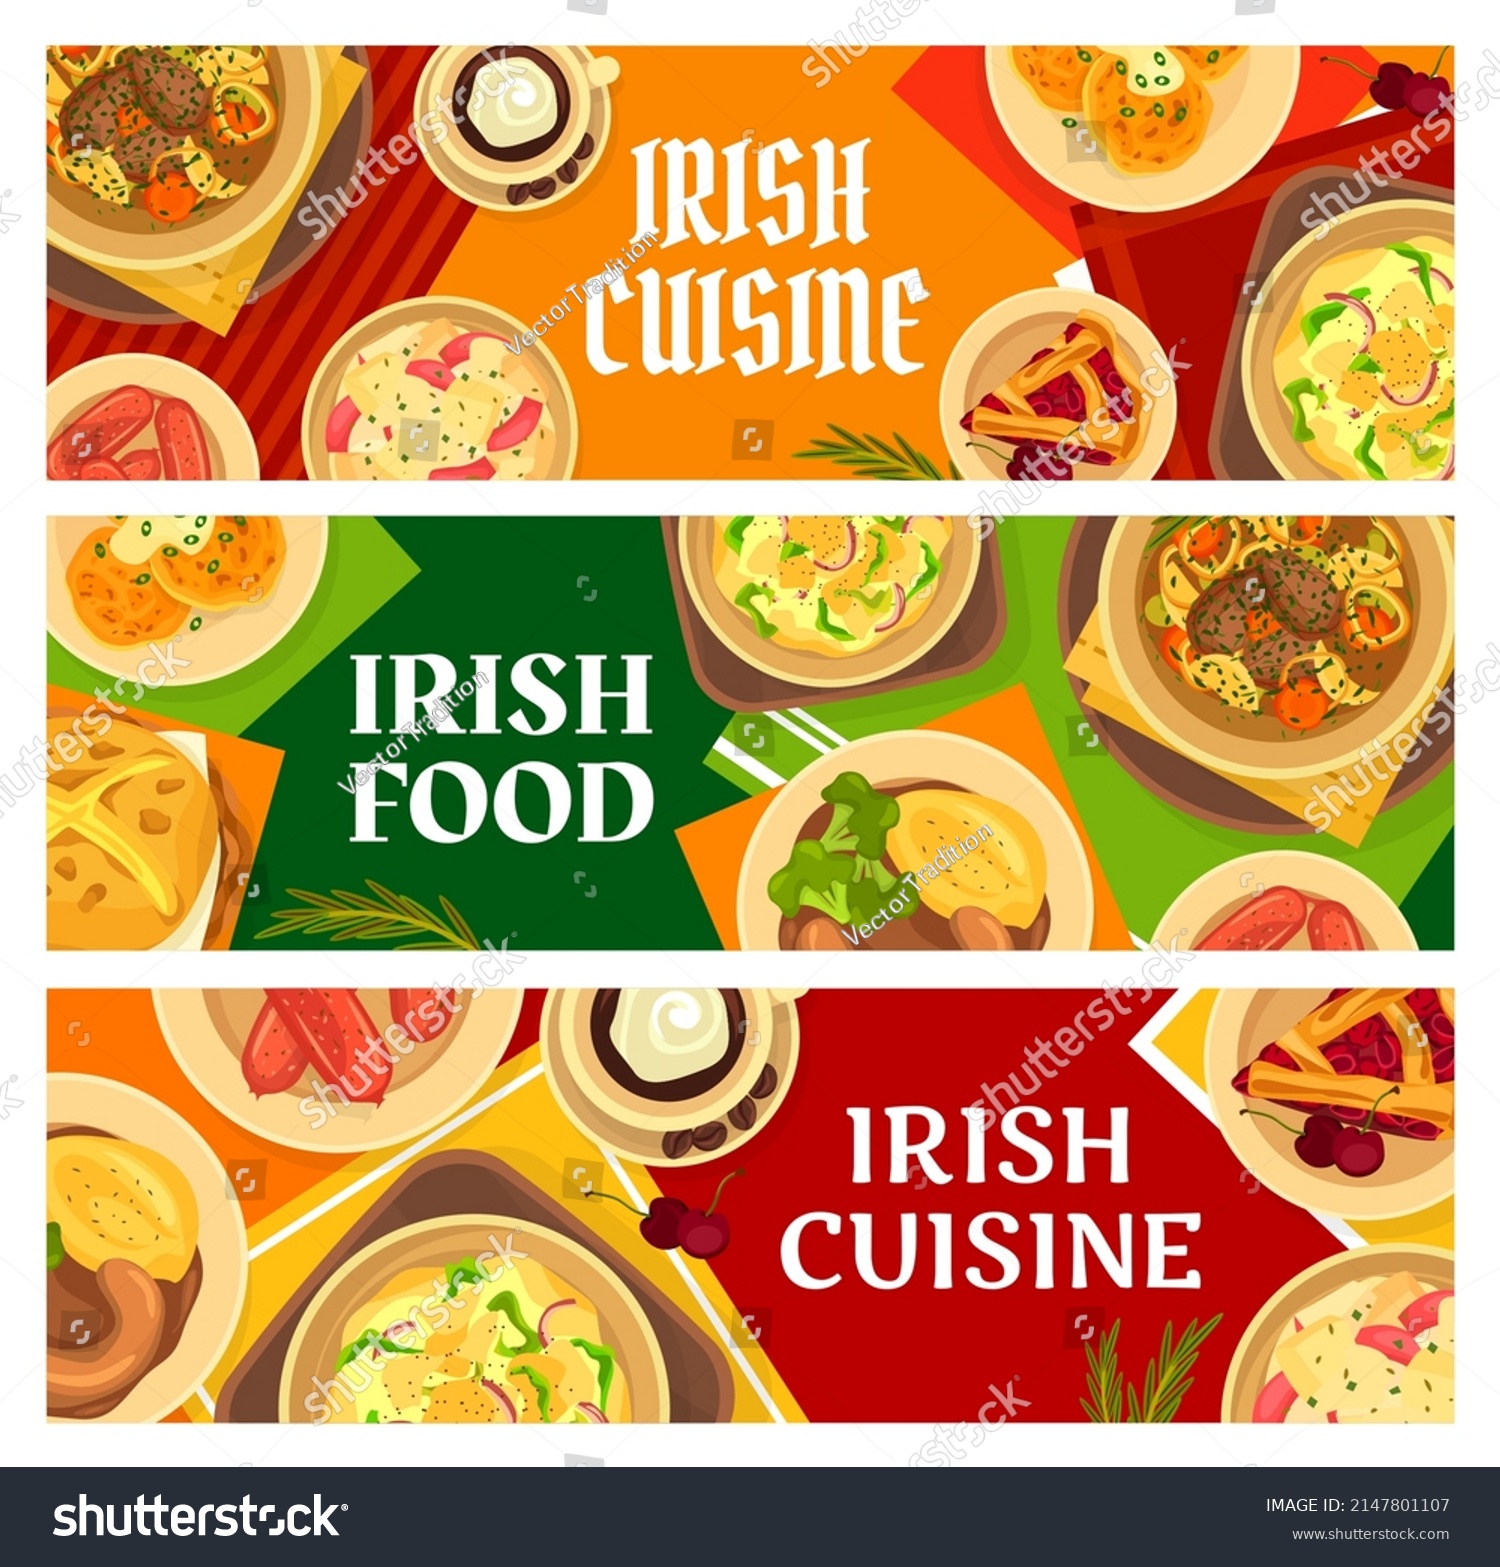 SVG of Irish cuisine restaurant dishes, meals banners. Boxty potato pancake, potato salad and beef Irish stew, homemade pork sausages and cherry pie, soda bread, meat and beer stew vector. Irish food meals svg